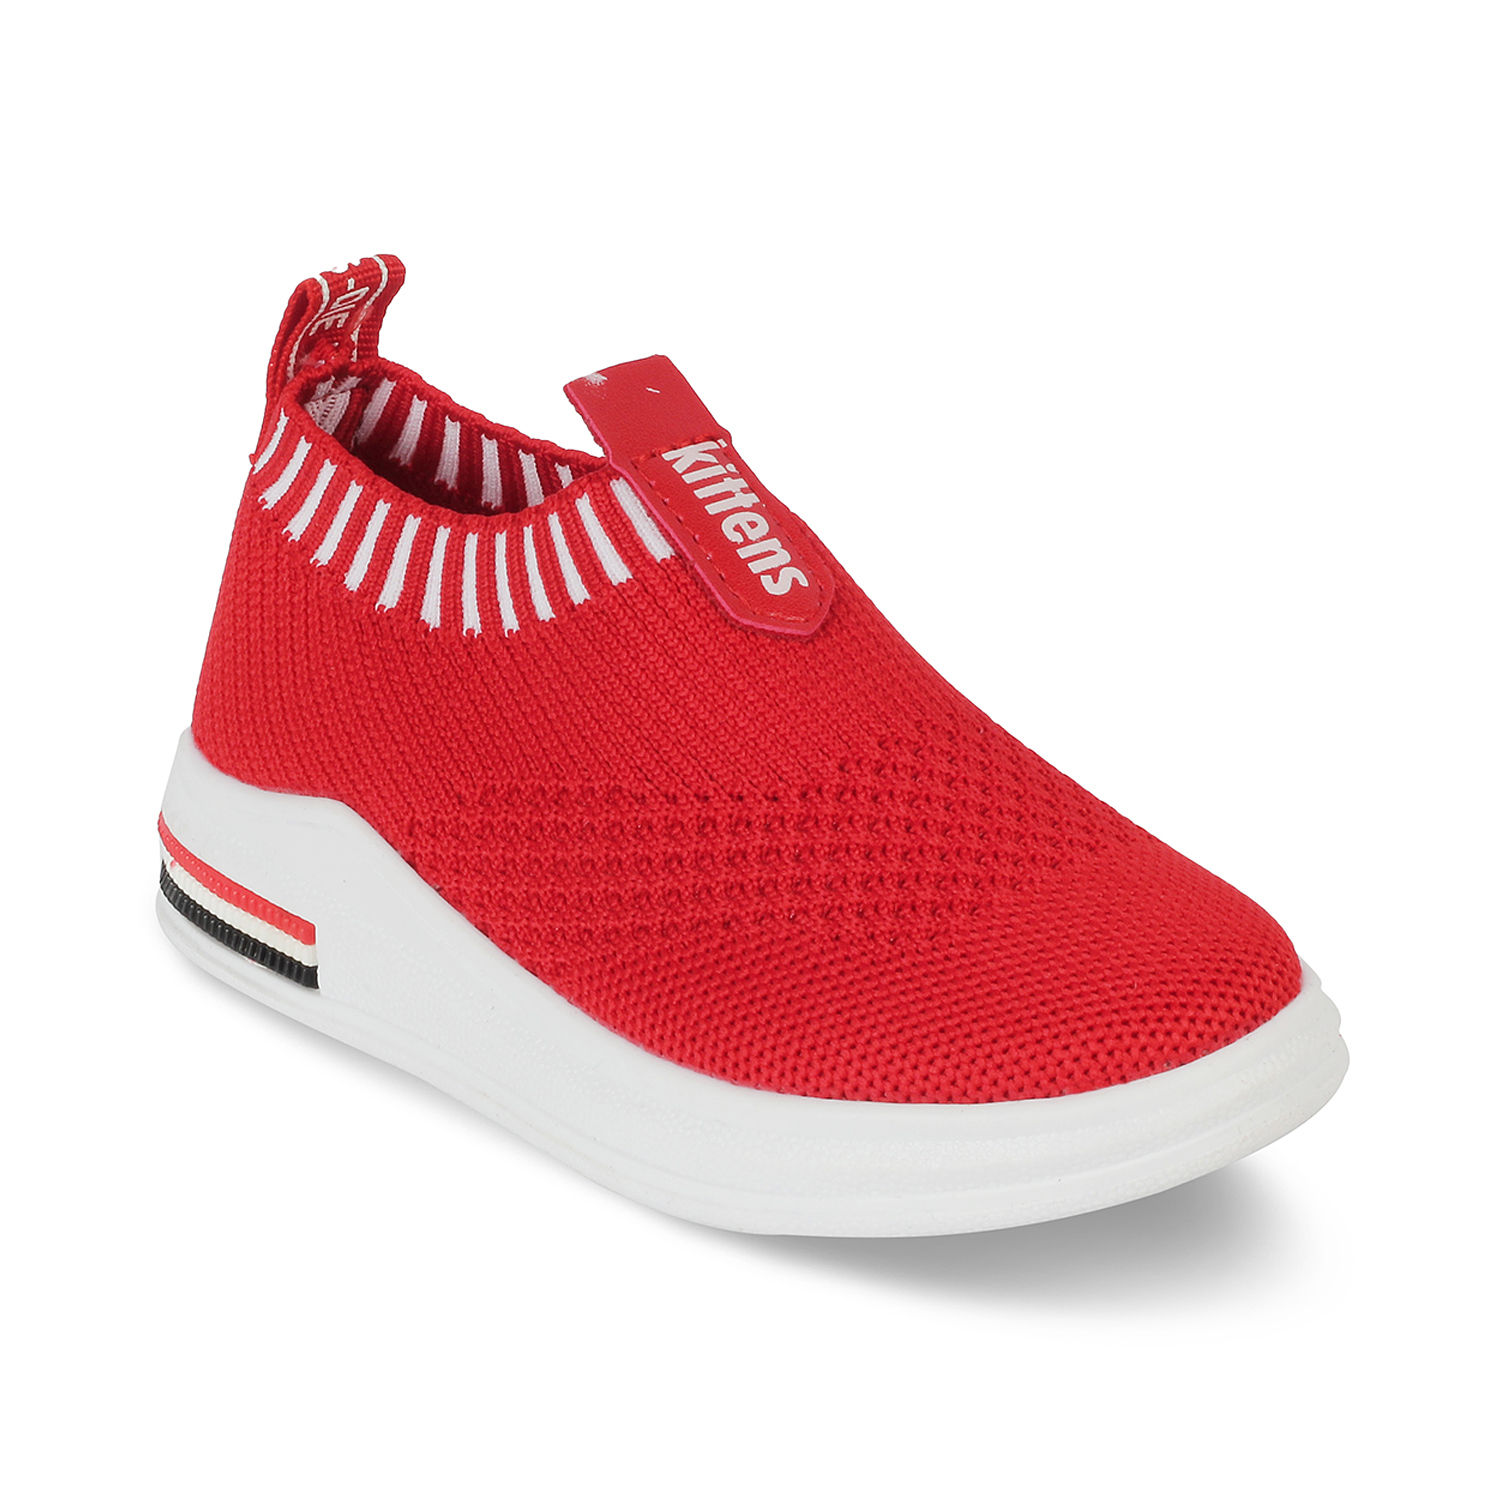 shoes for boys in red colour